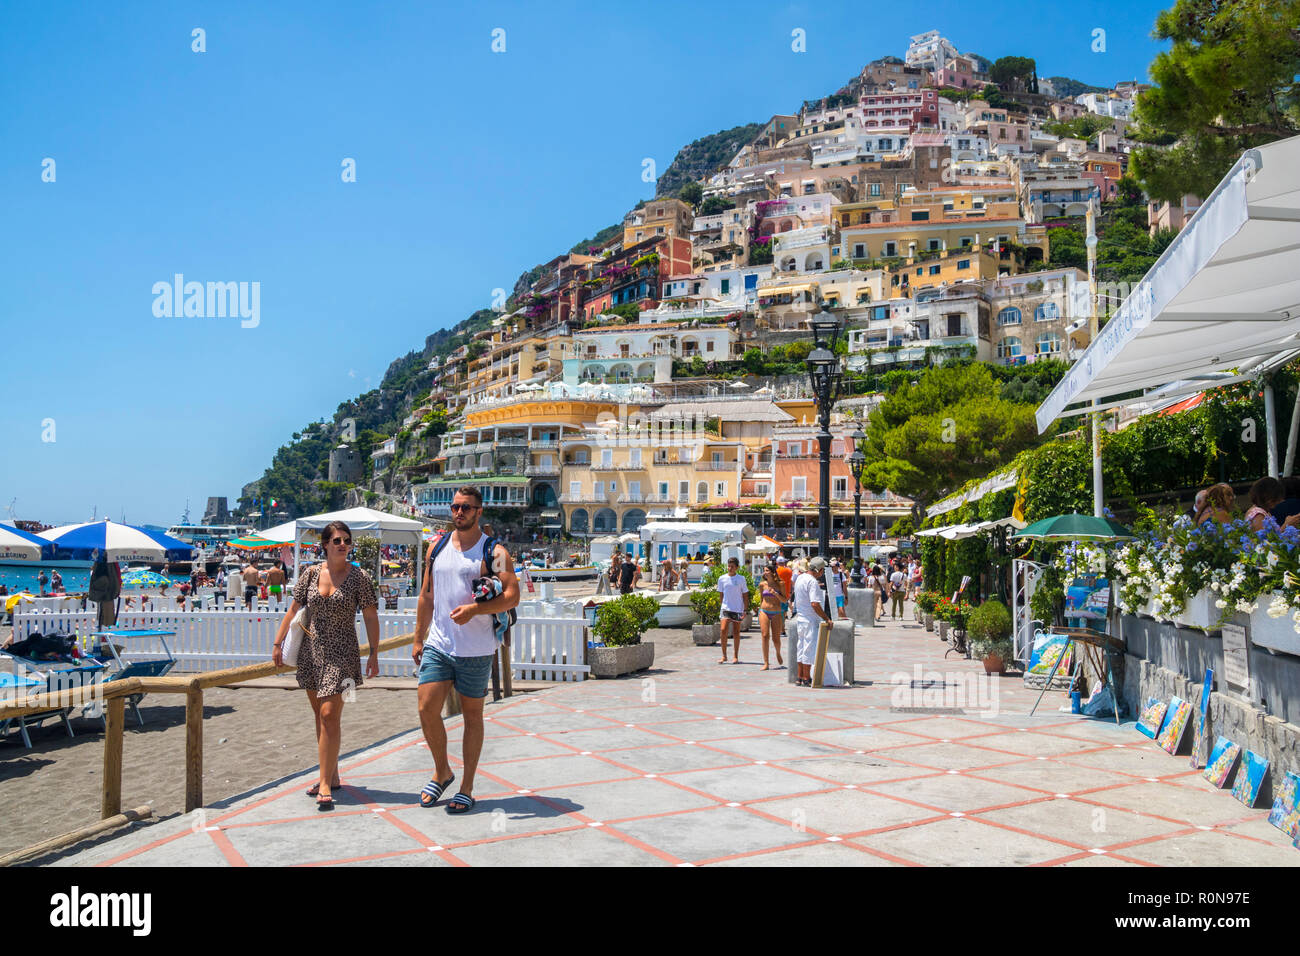 People walking, tourists, Beautiful Stunning, Colourful Promenade, Mountain Village Town, Positano Italy, Iconic, best life concept, travel, vacation, Stock Photo